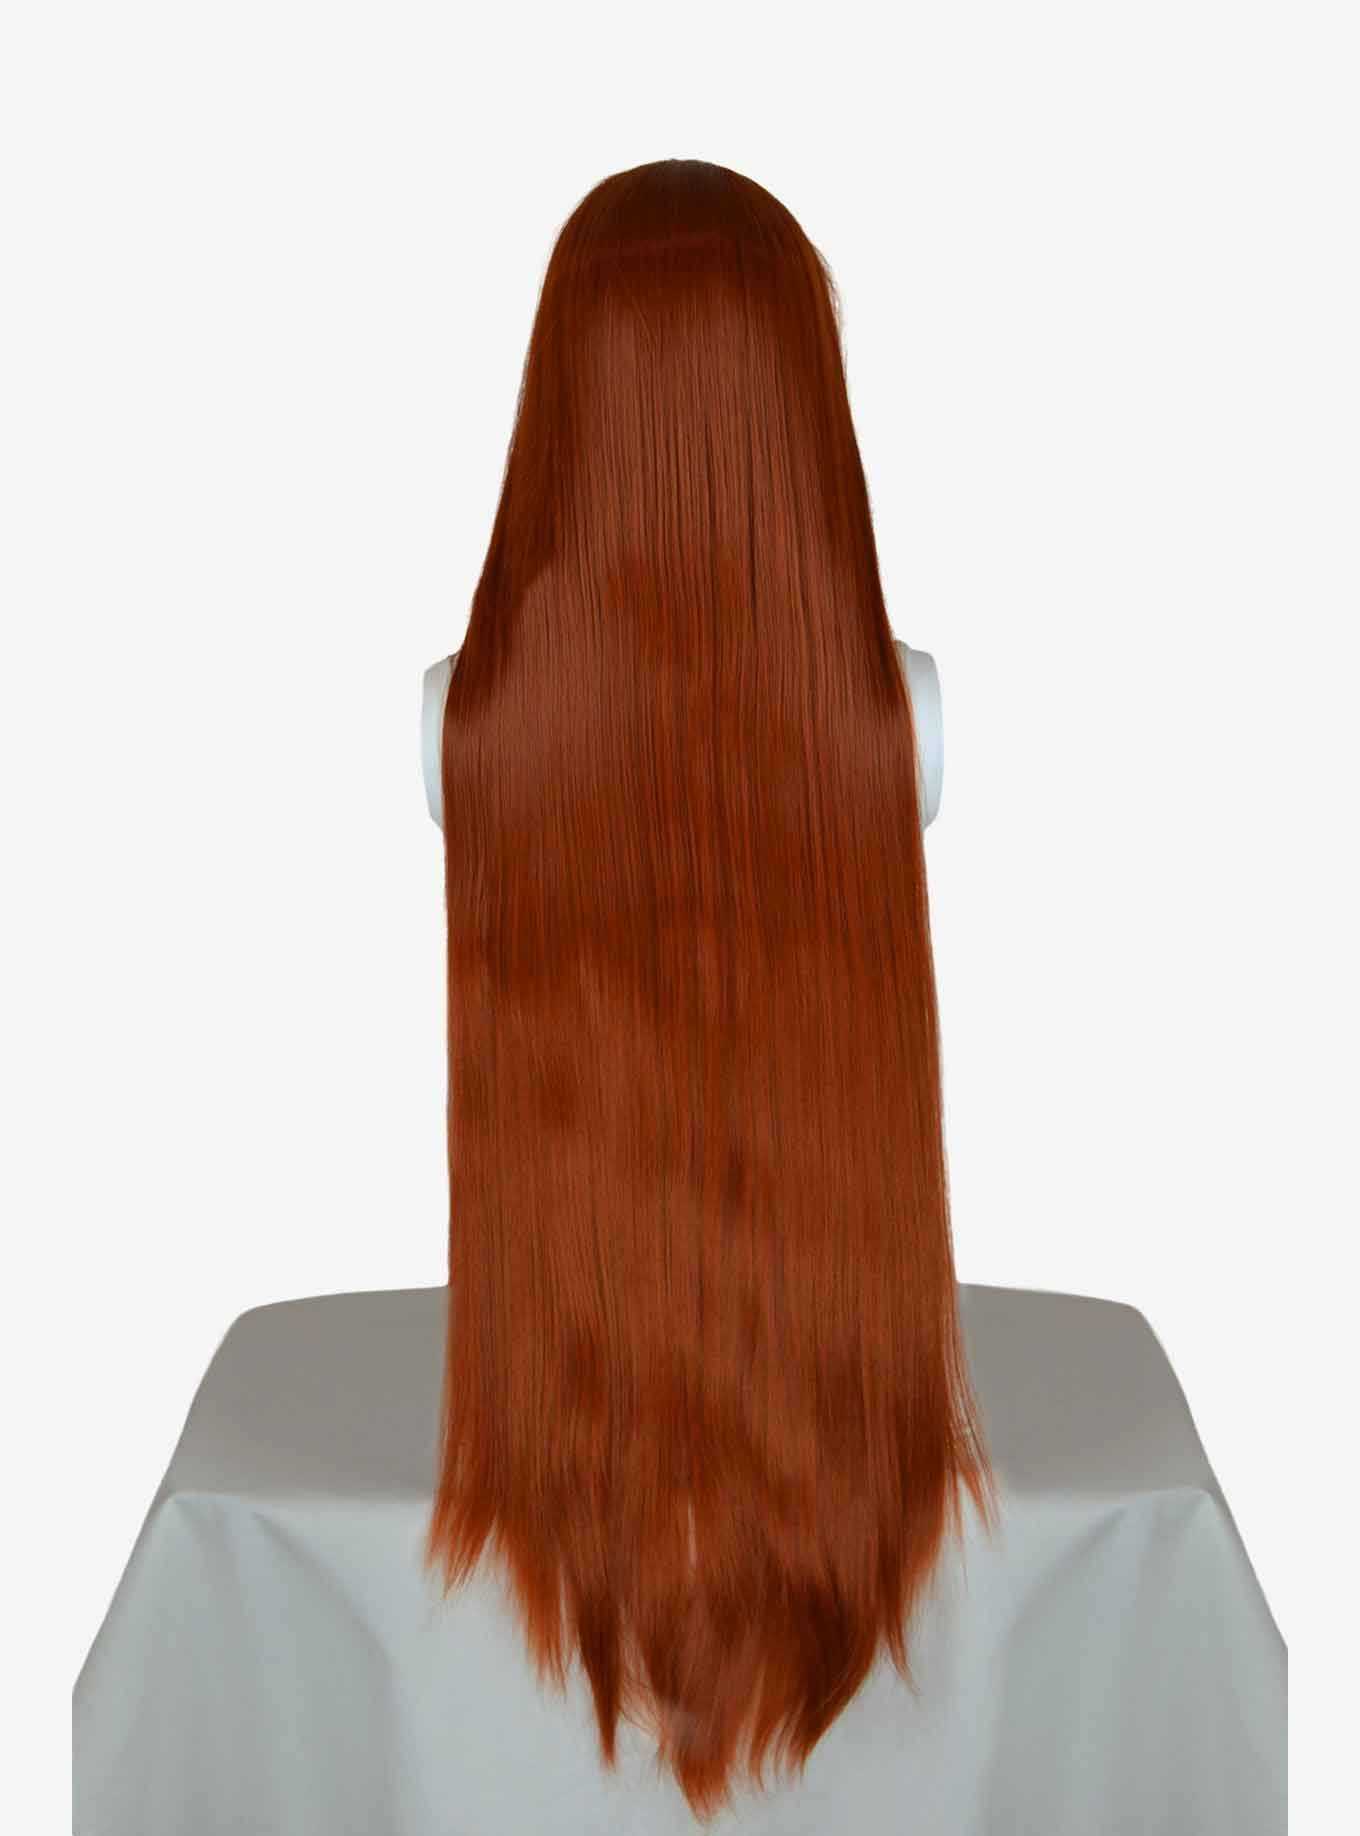 Epic Cosplay Persephone Copper Red Extra Long Straight Wig, , hi-res